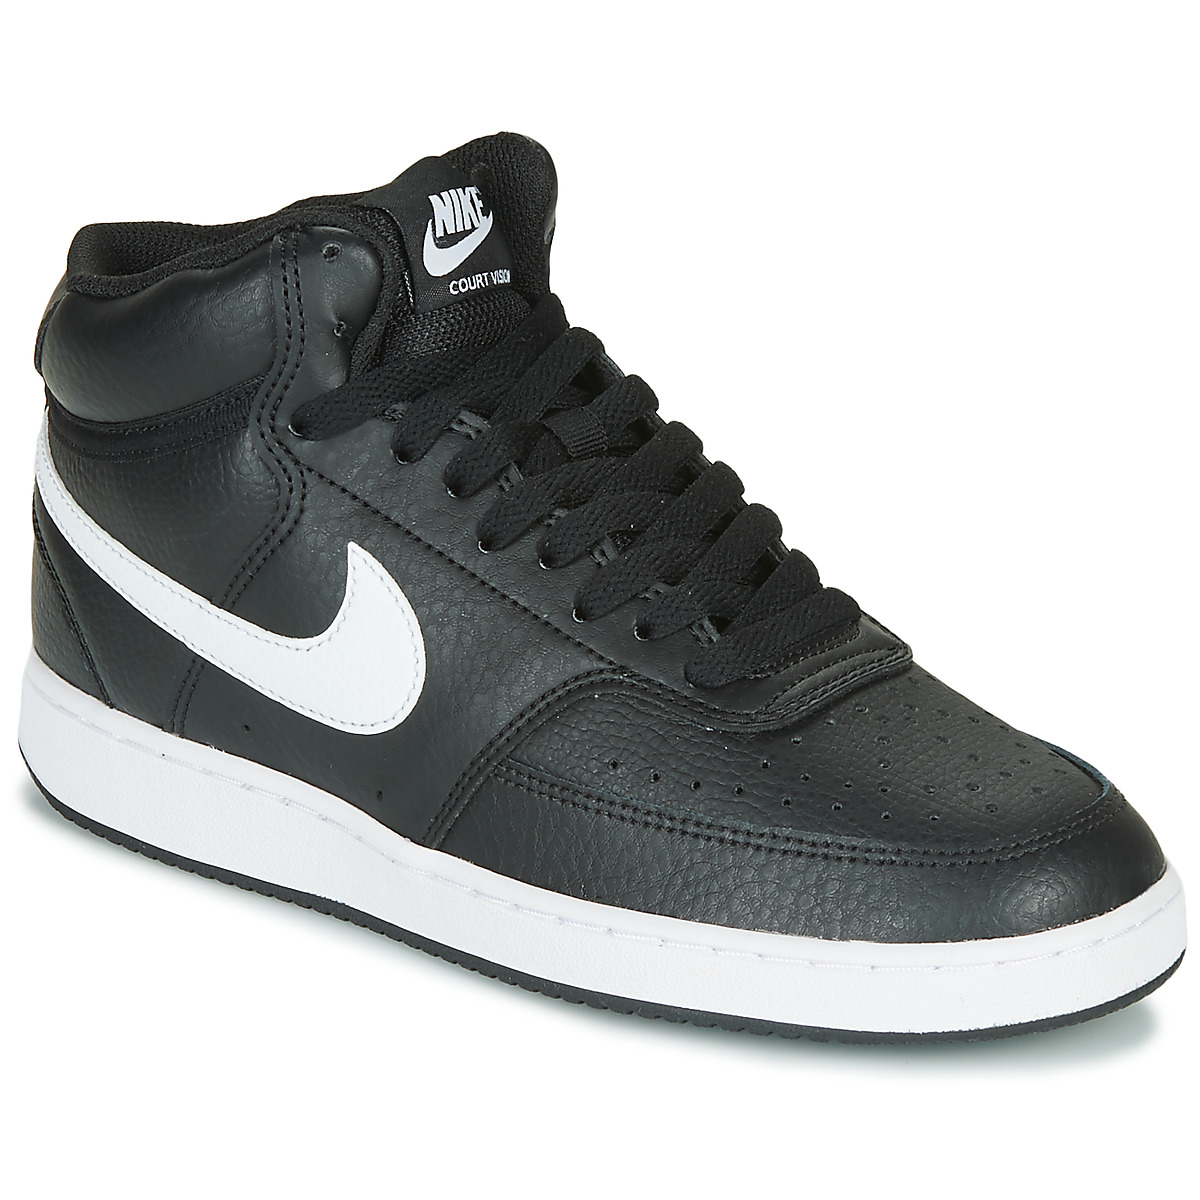 Nike COURT VISION MID 17891007 1200 A